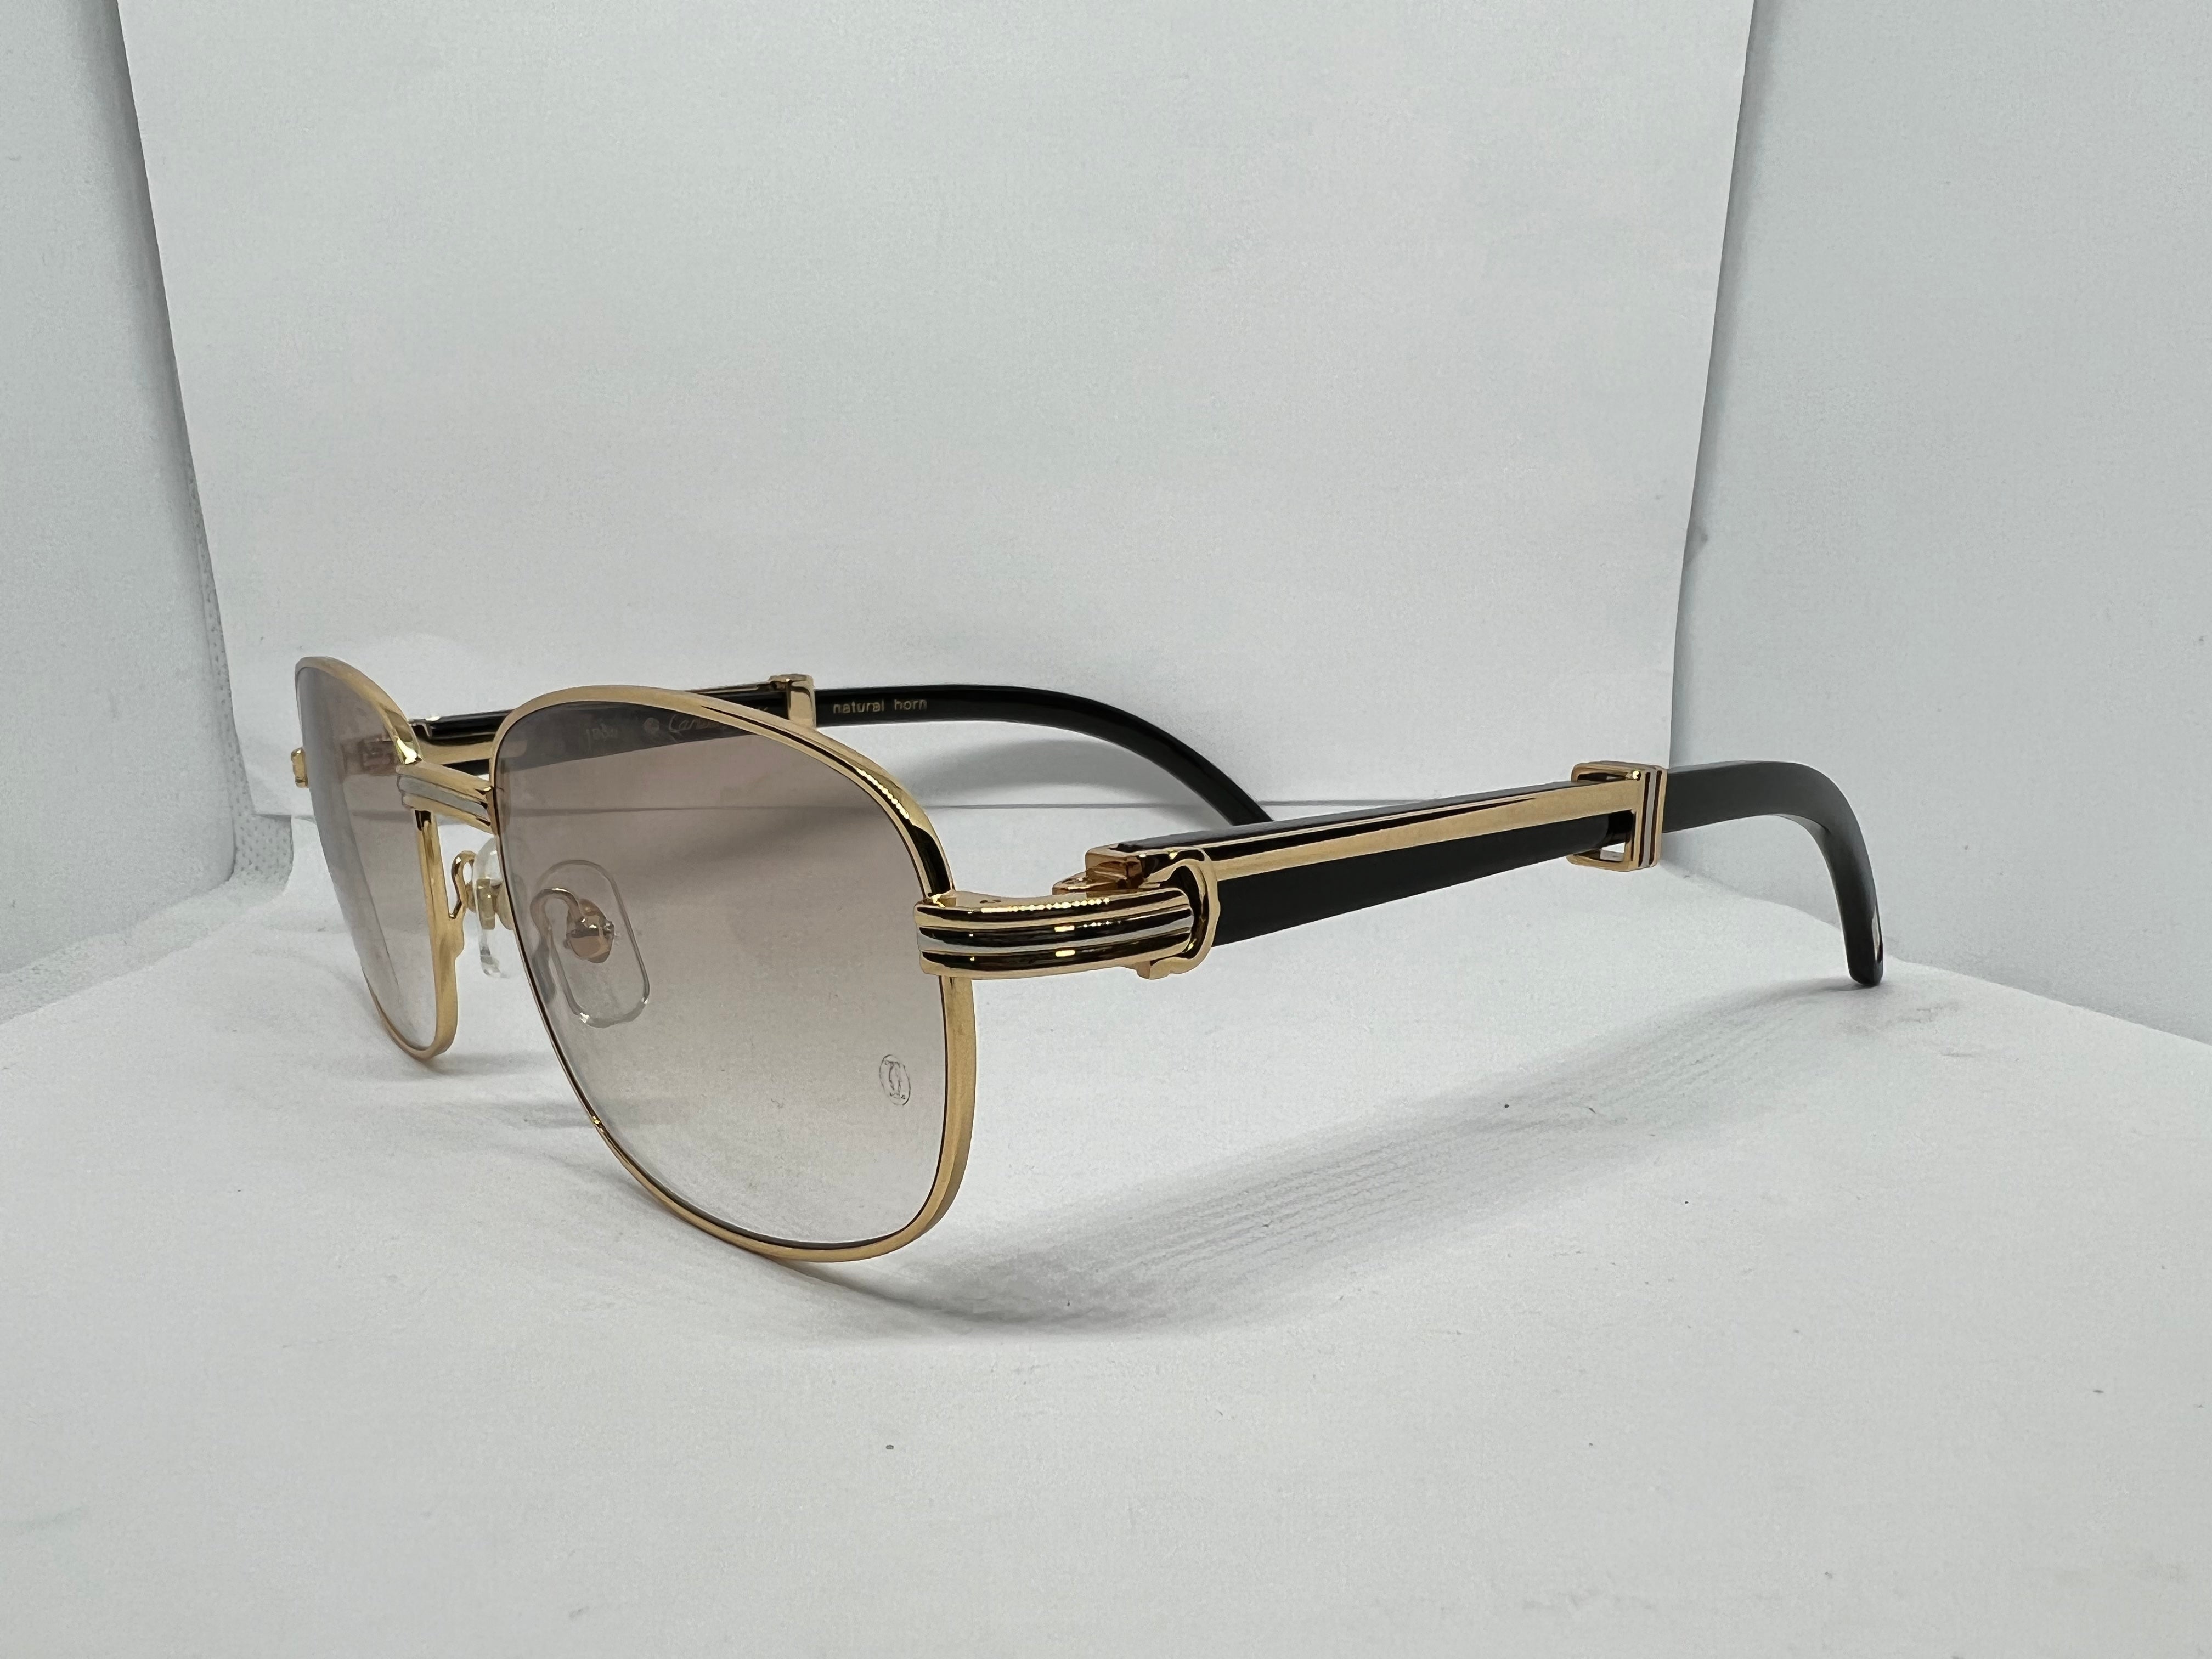 NEW*** Cartier 55-21 Gold Frames w/ Brown Tinted Lenses